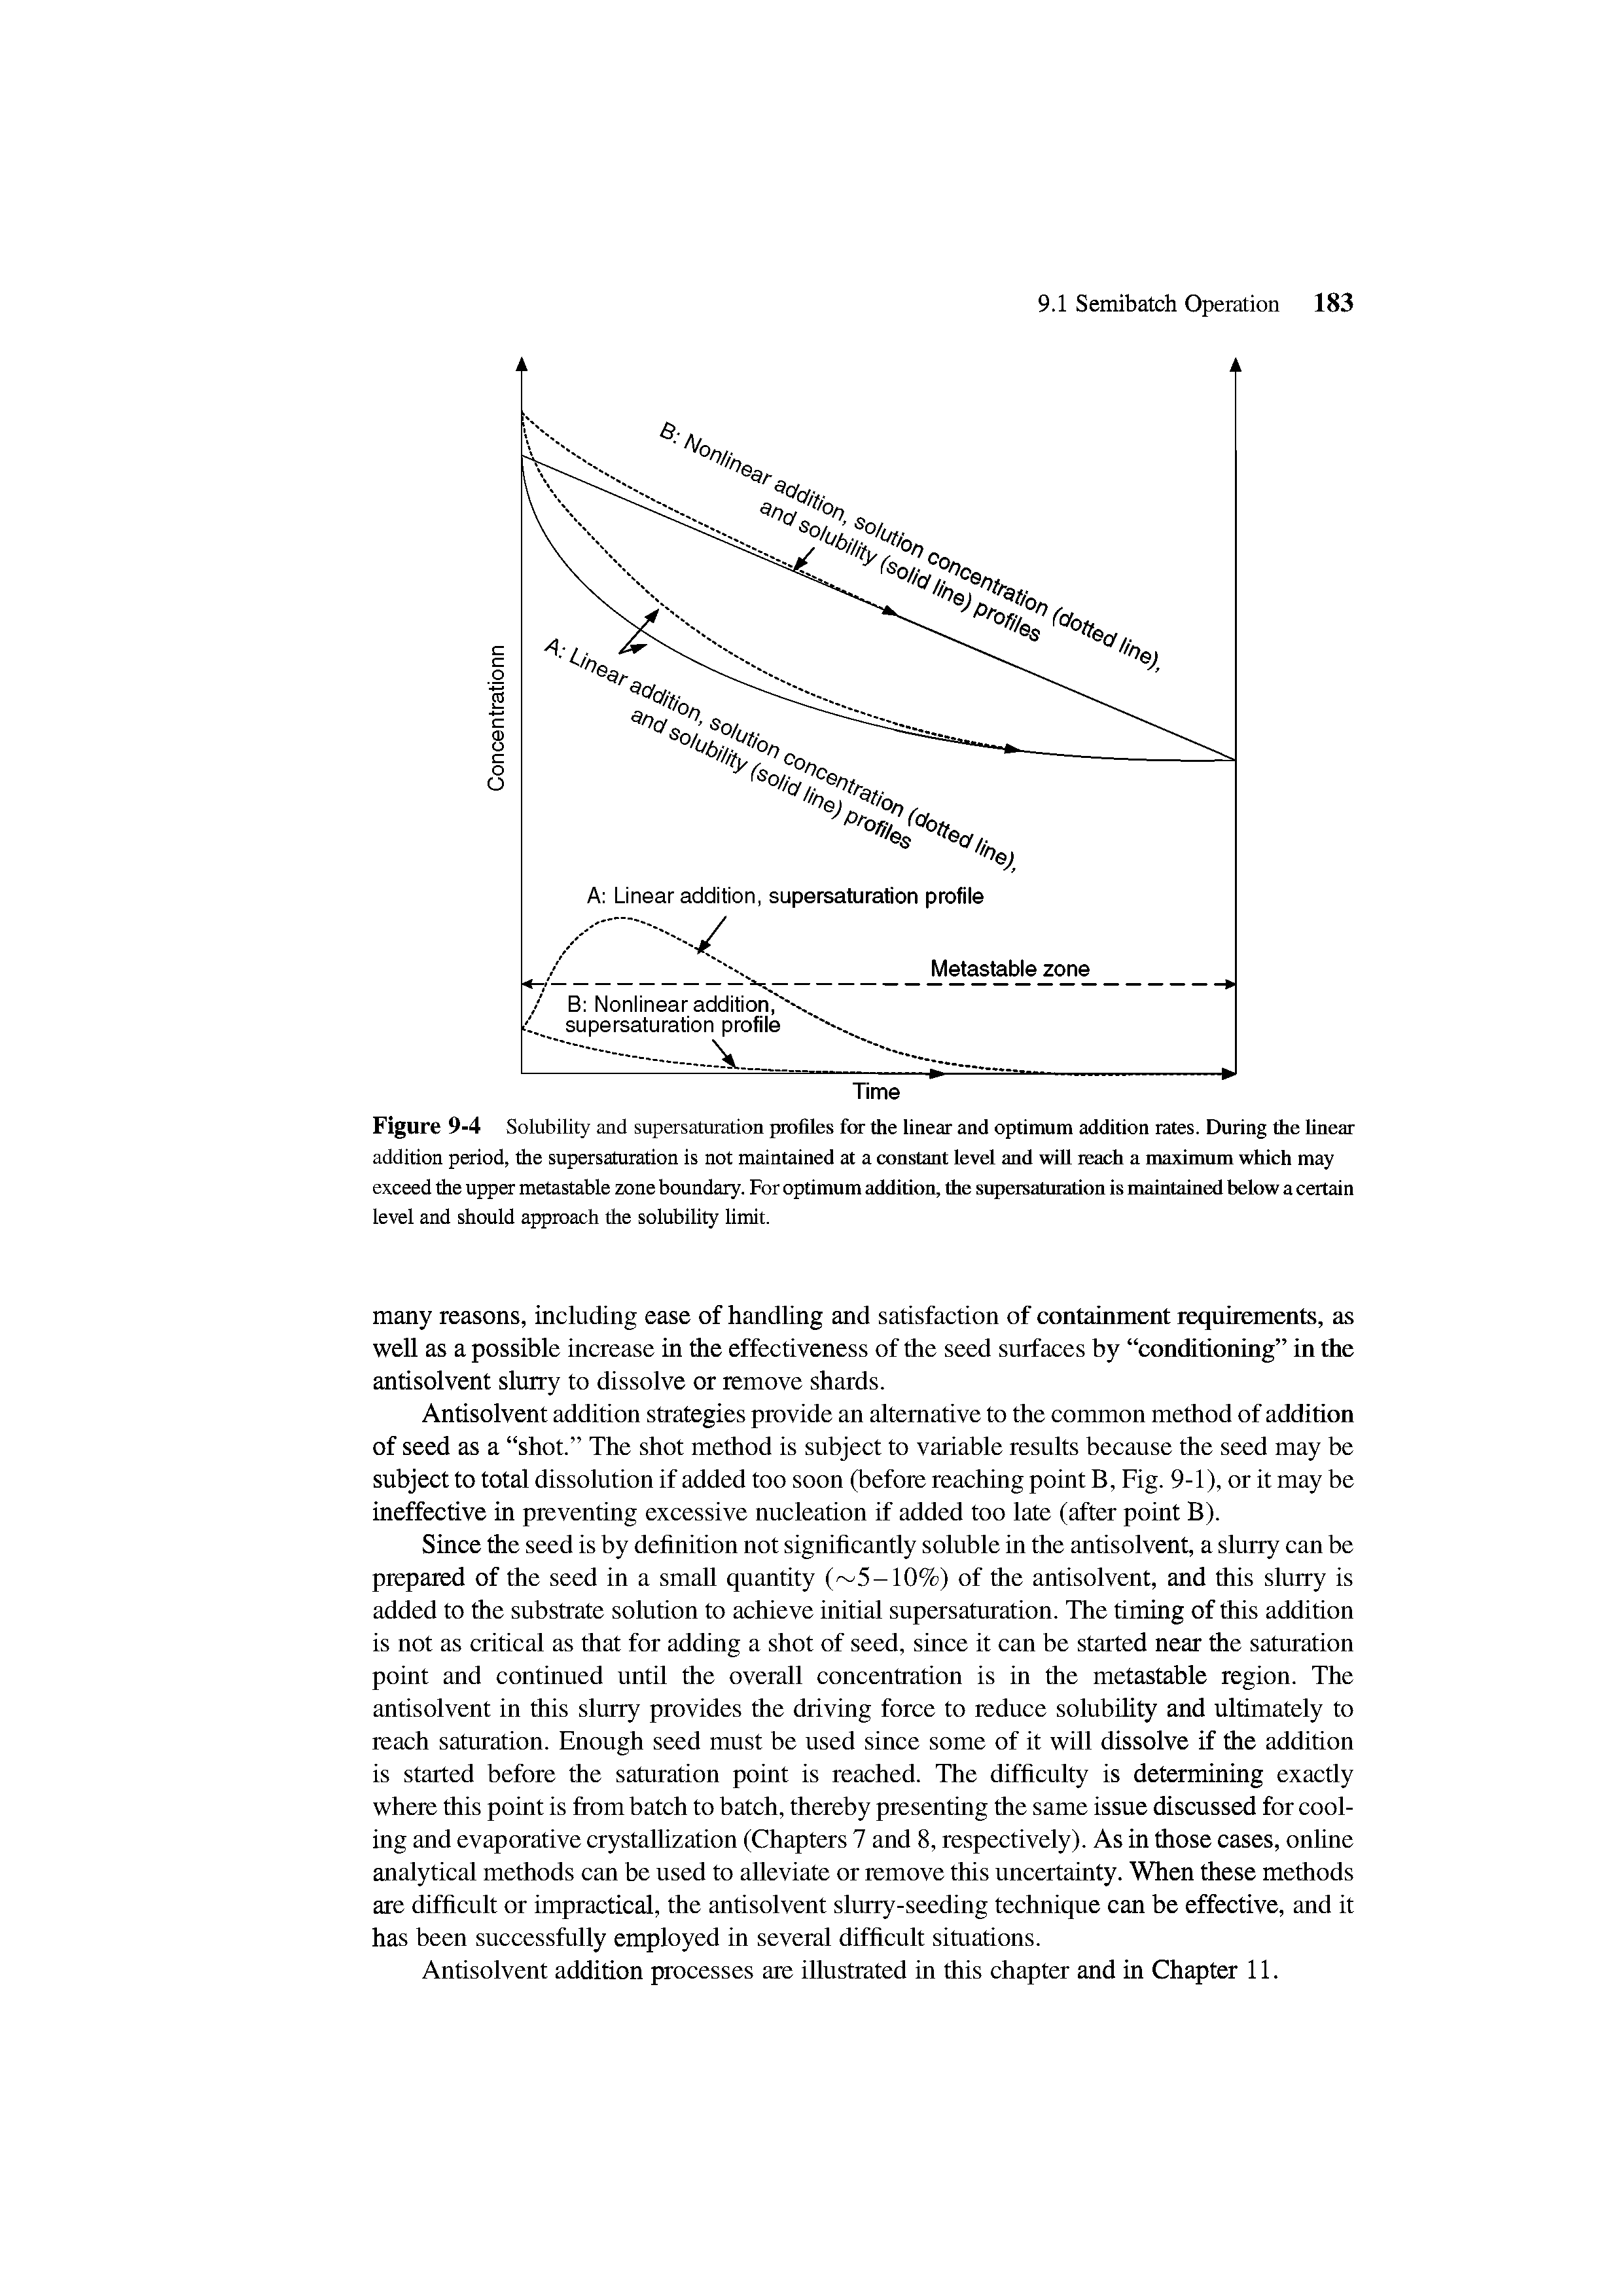 Figure 9-4 Solubility and supersaturation profiles for the linear and optimum addition rates. During the linear addition period, the supersaturation is not maintained at a constant level and will reach a maximum which may exceed the upper metastable zone boundary. For optimum addition, the supersaturation is maintained below a certain level and should approach the solubility limit.